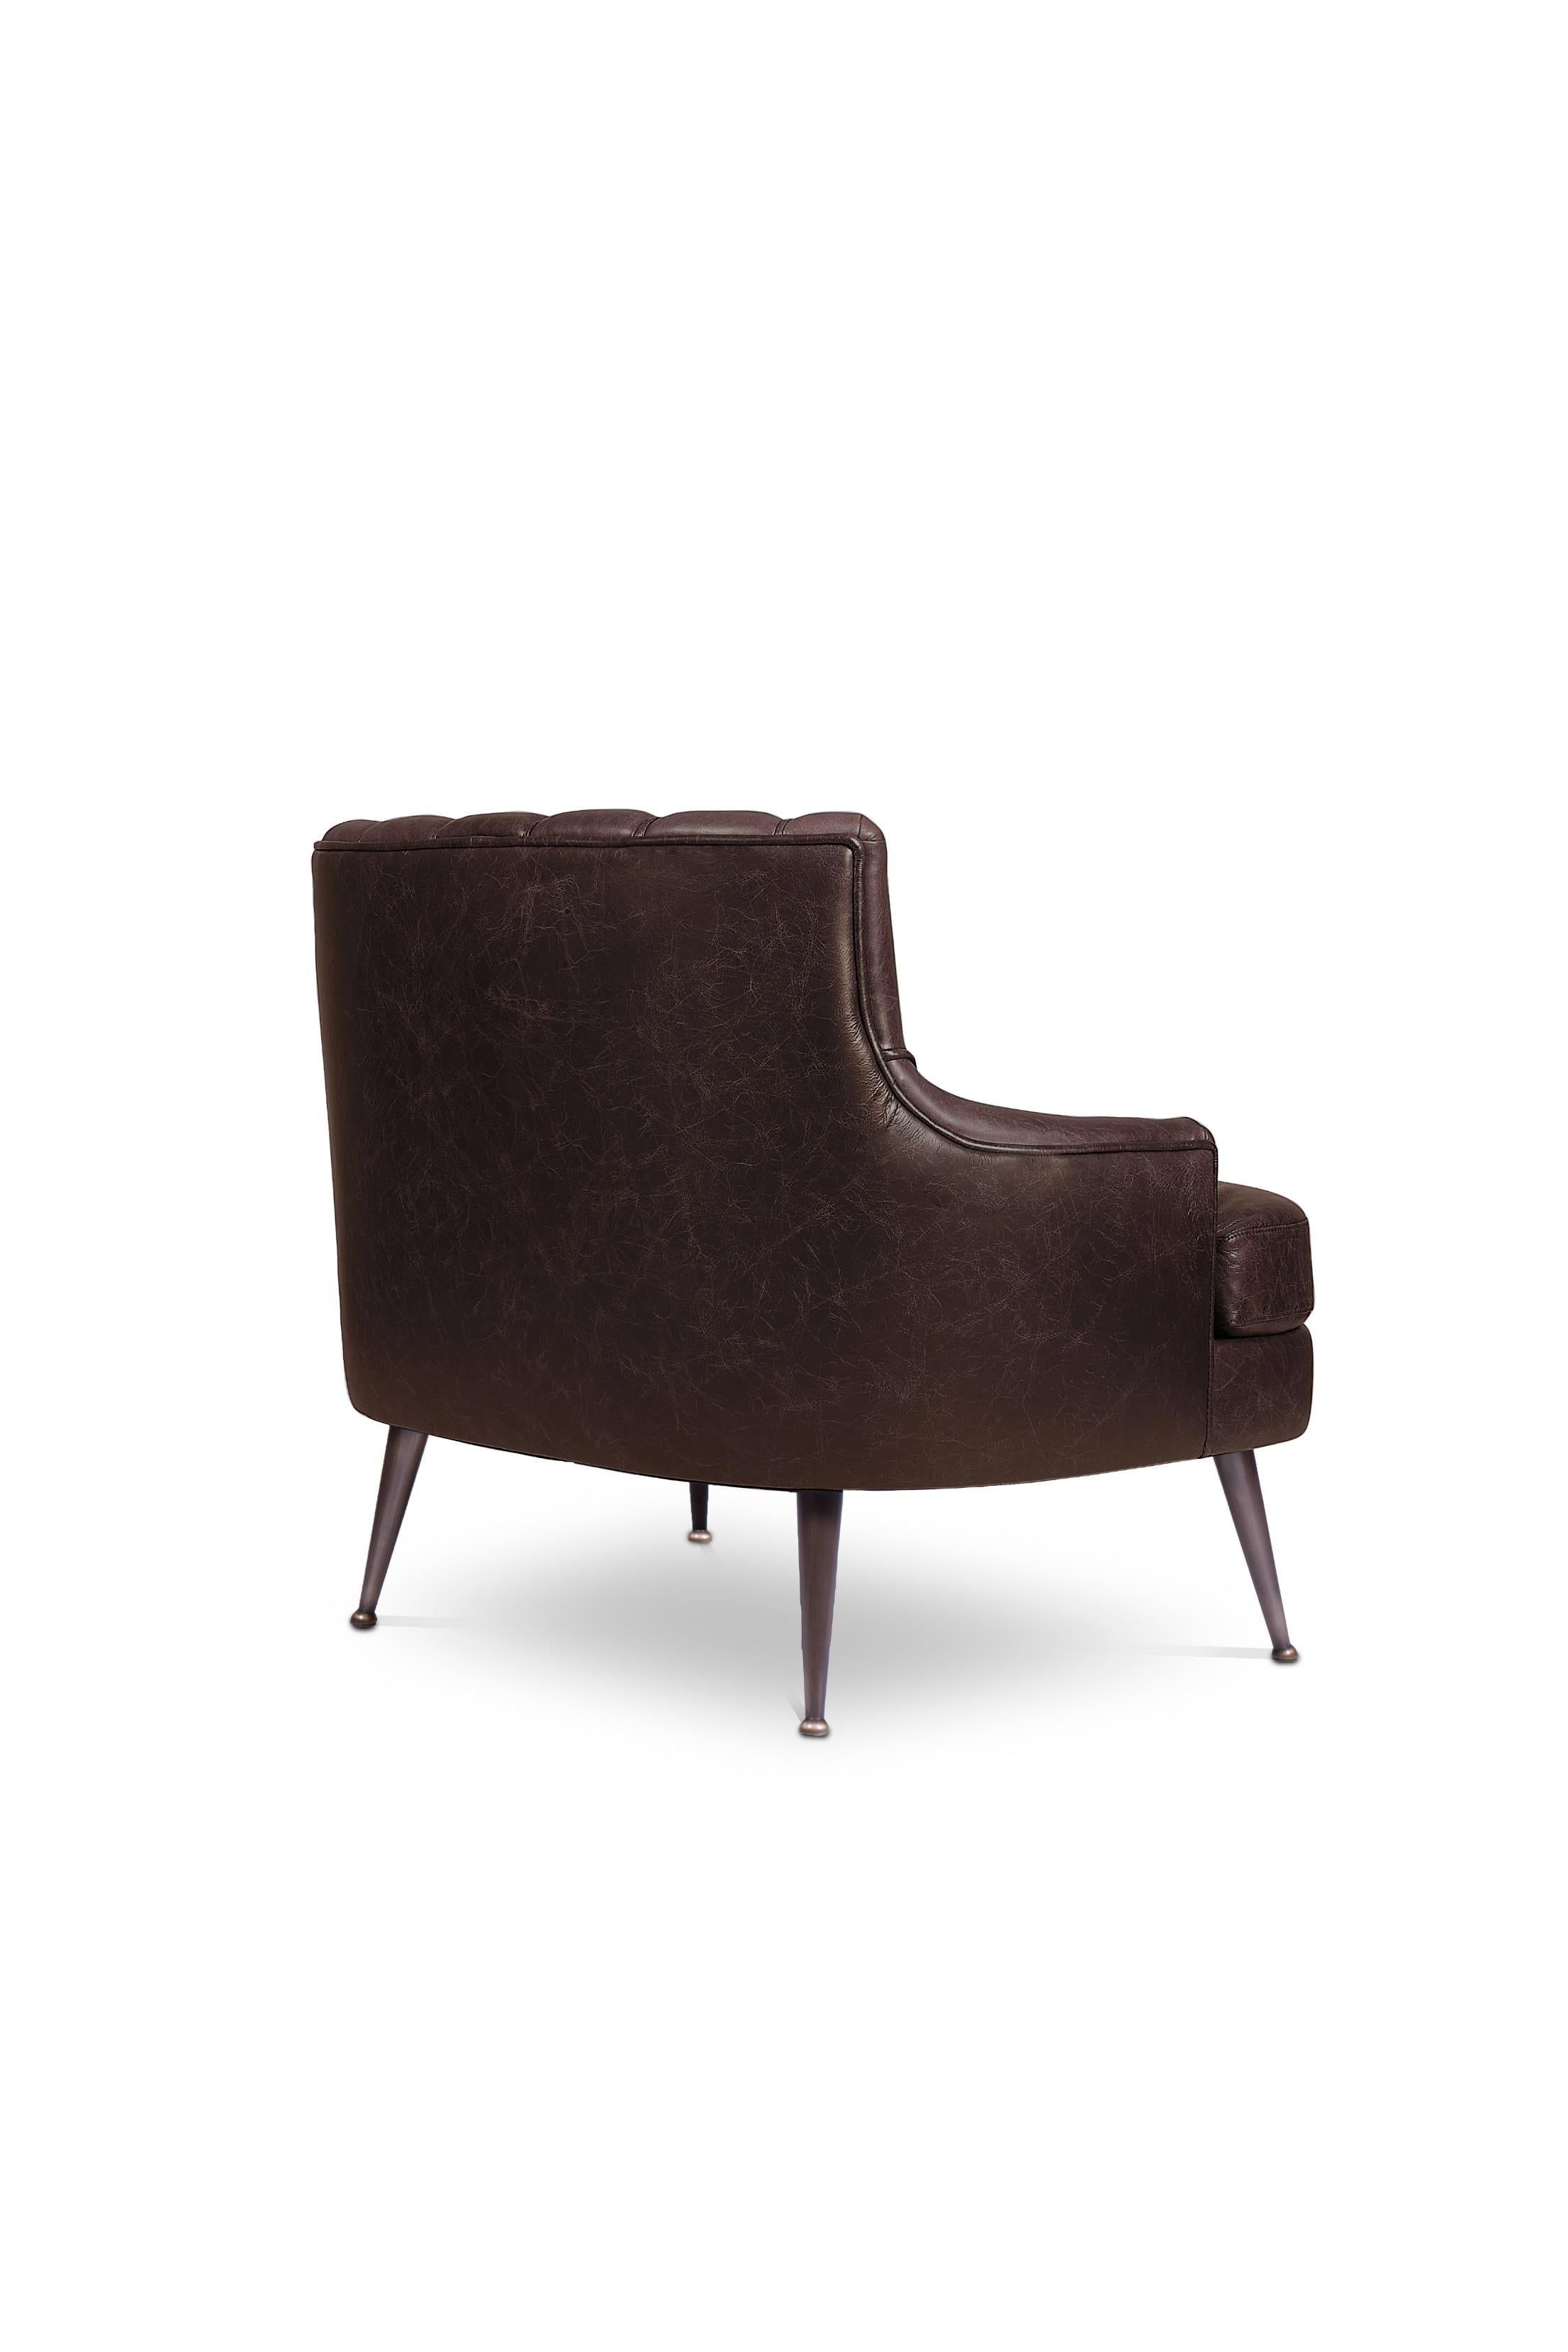 Plum Armchair in Leather And Matte Aged Brass In New Condition For Sale In New York, NY